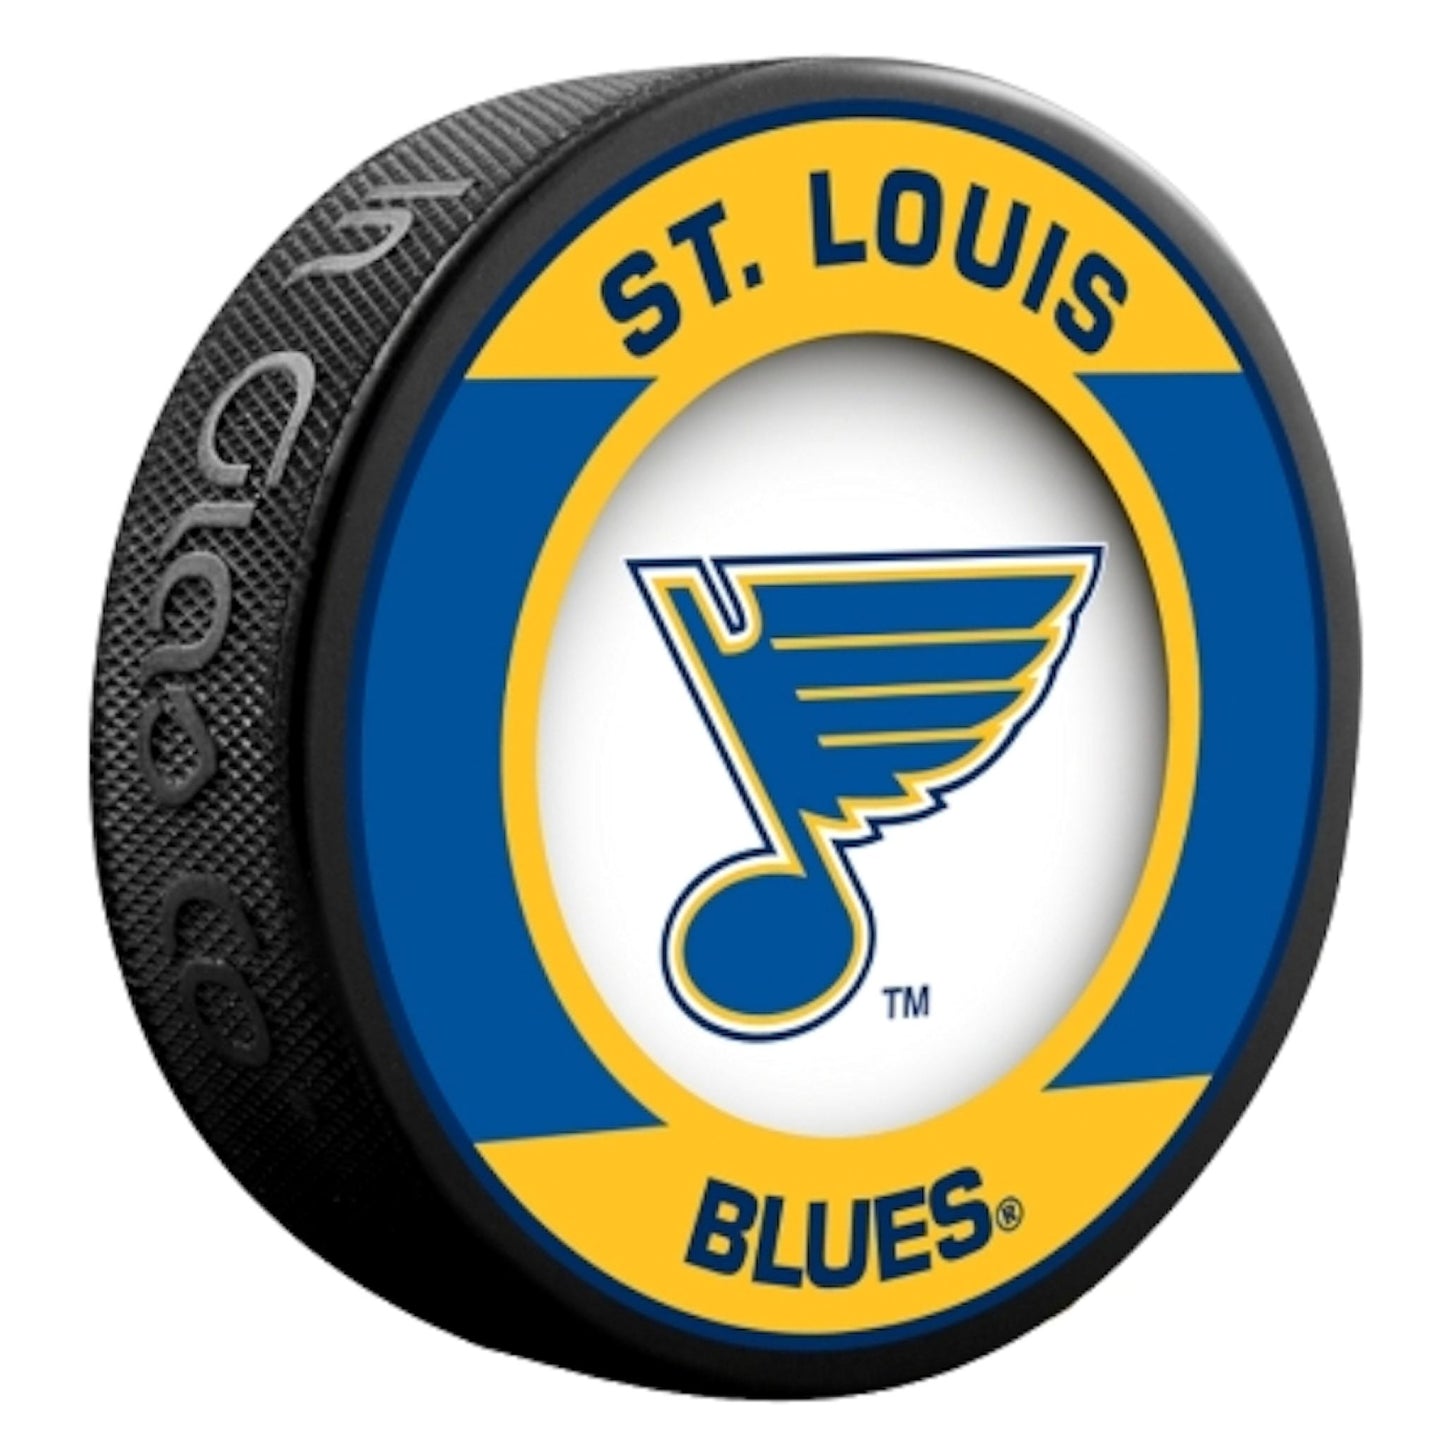 St Louis Blues Retro Series Collectible Hockey Puck